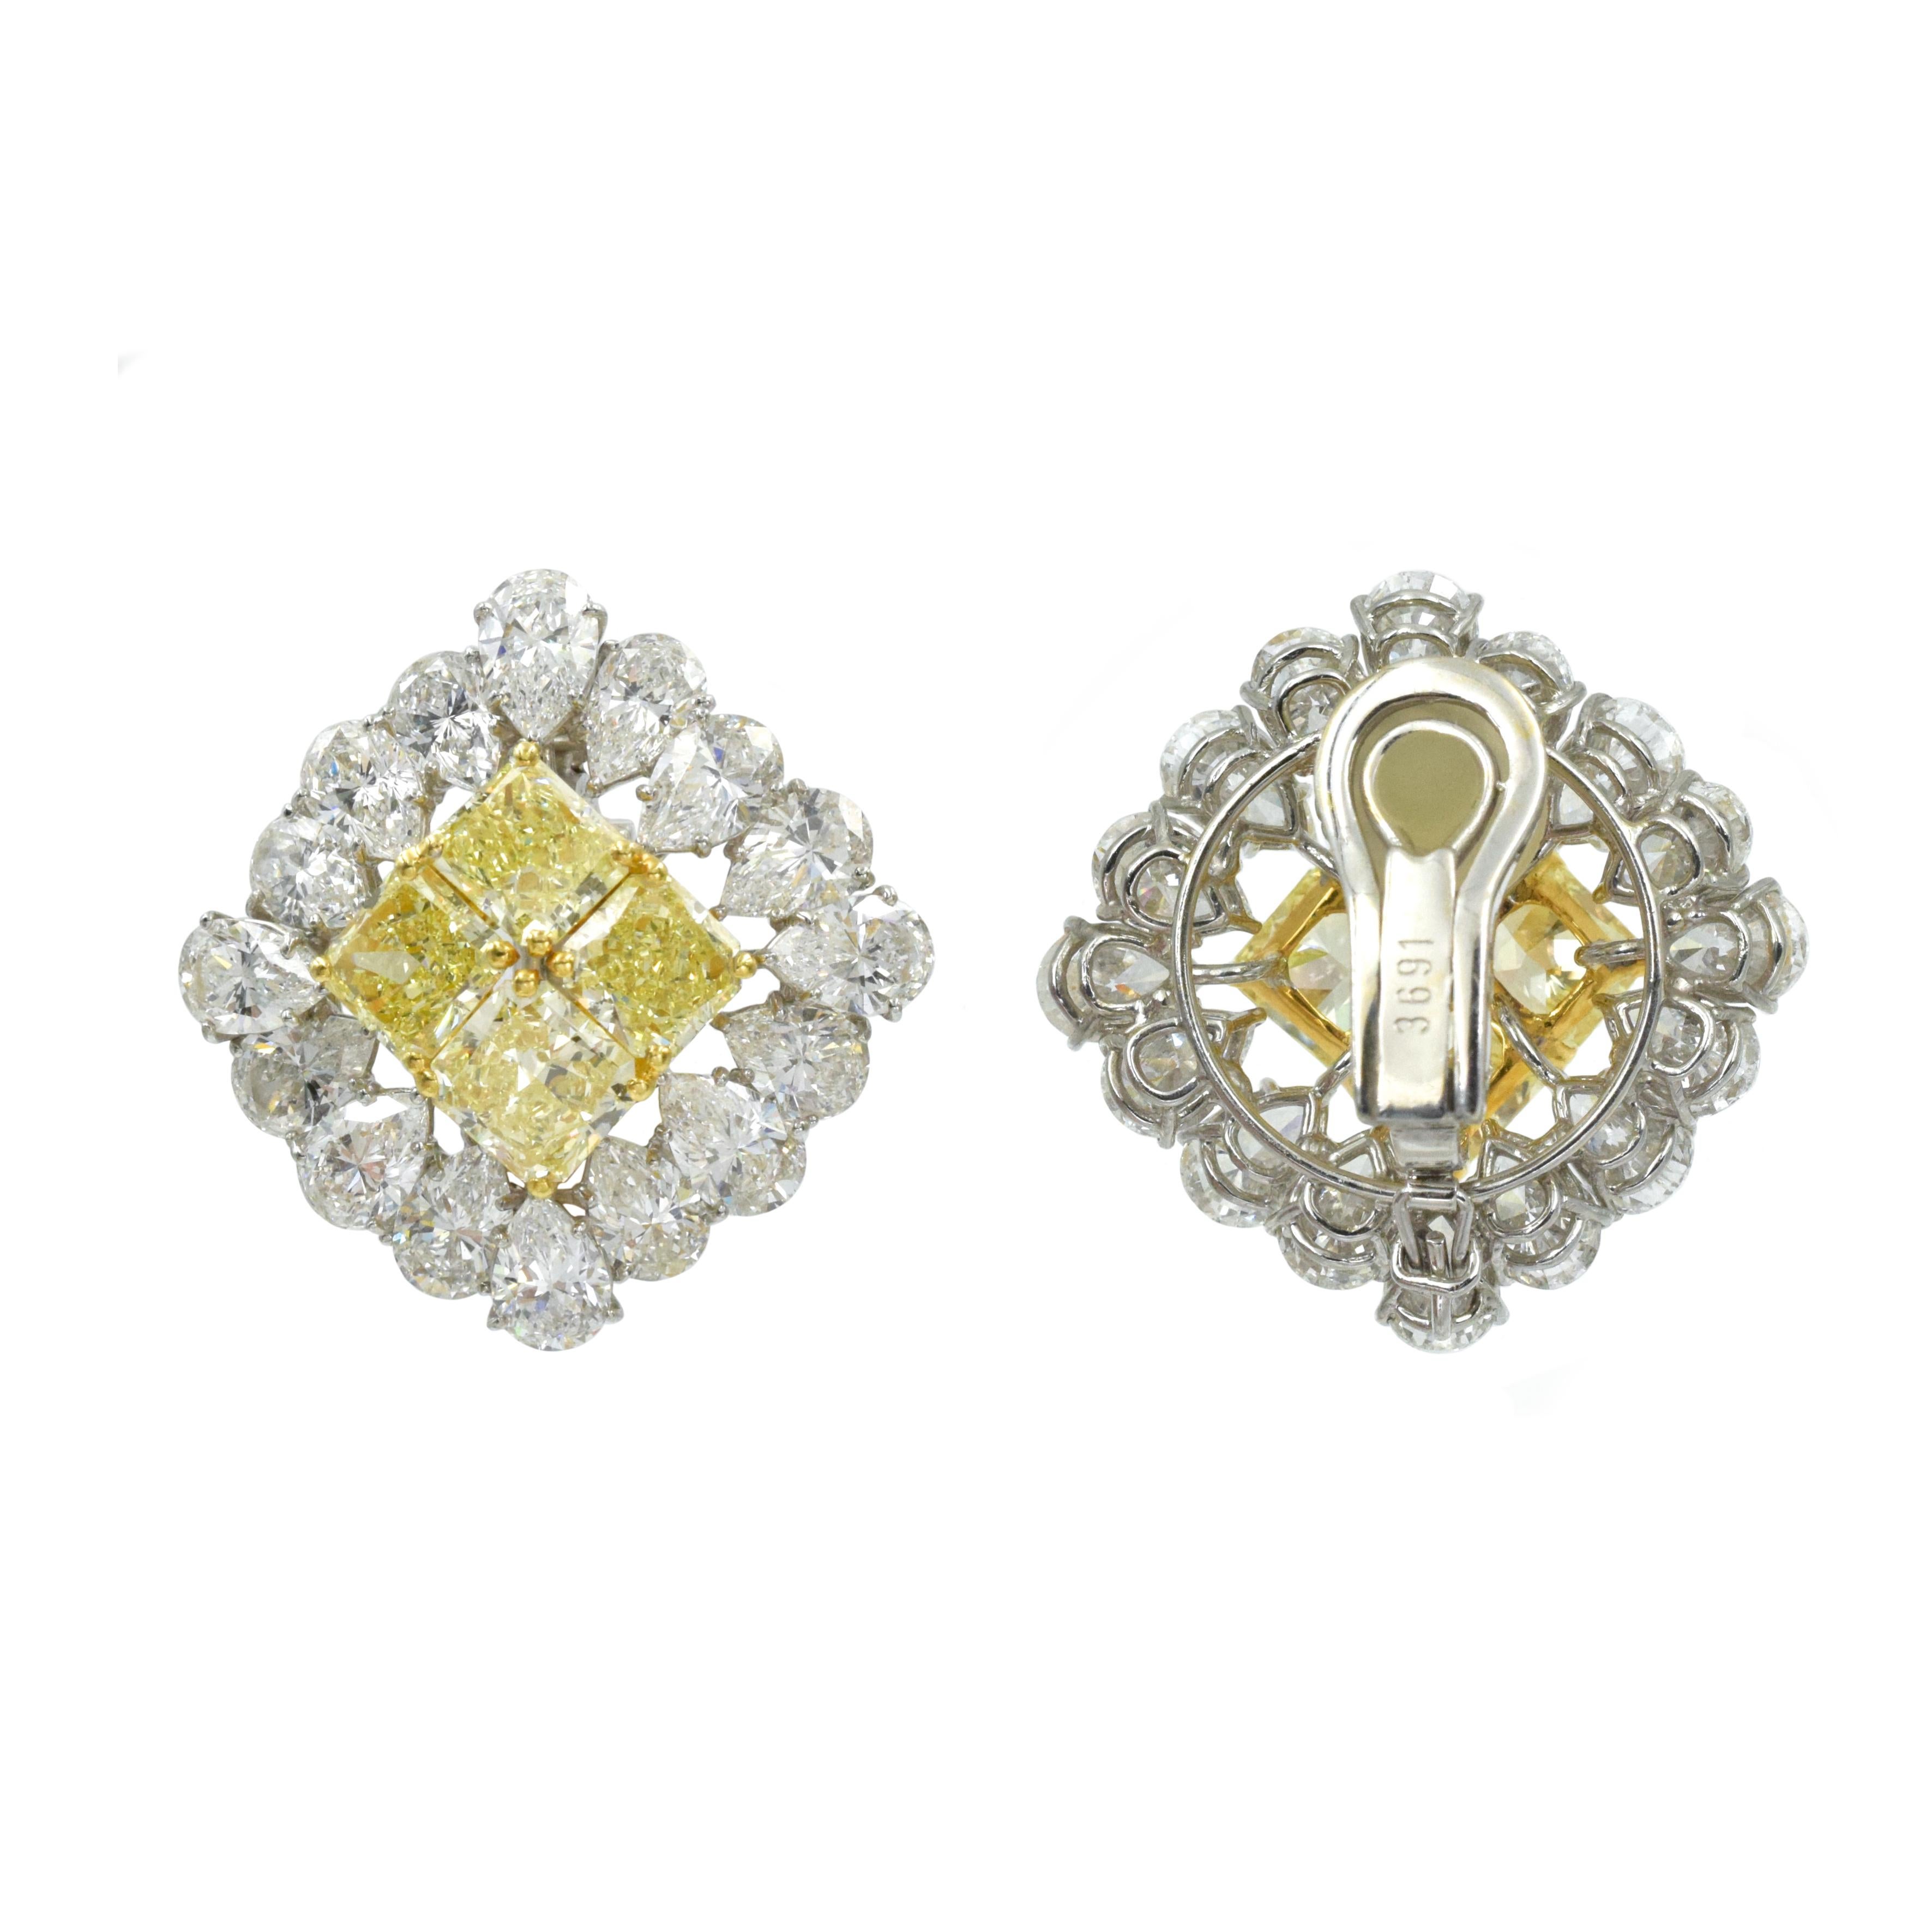 Radiant Cut Graff Natural Yellow and White Diamond Earrings